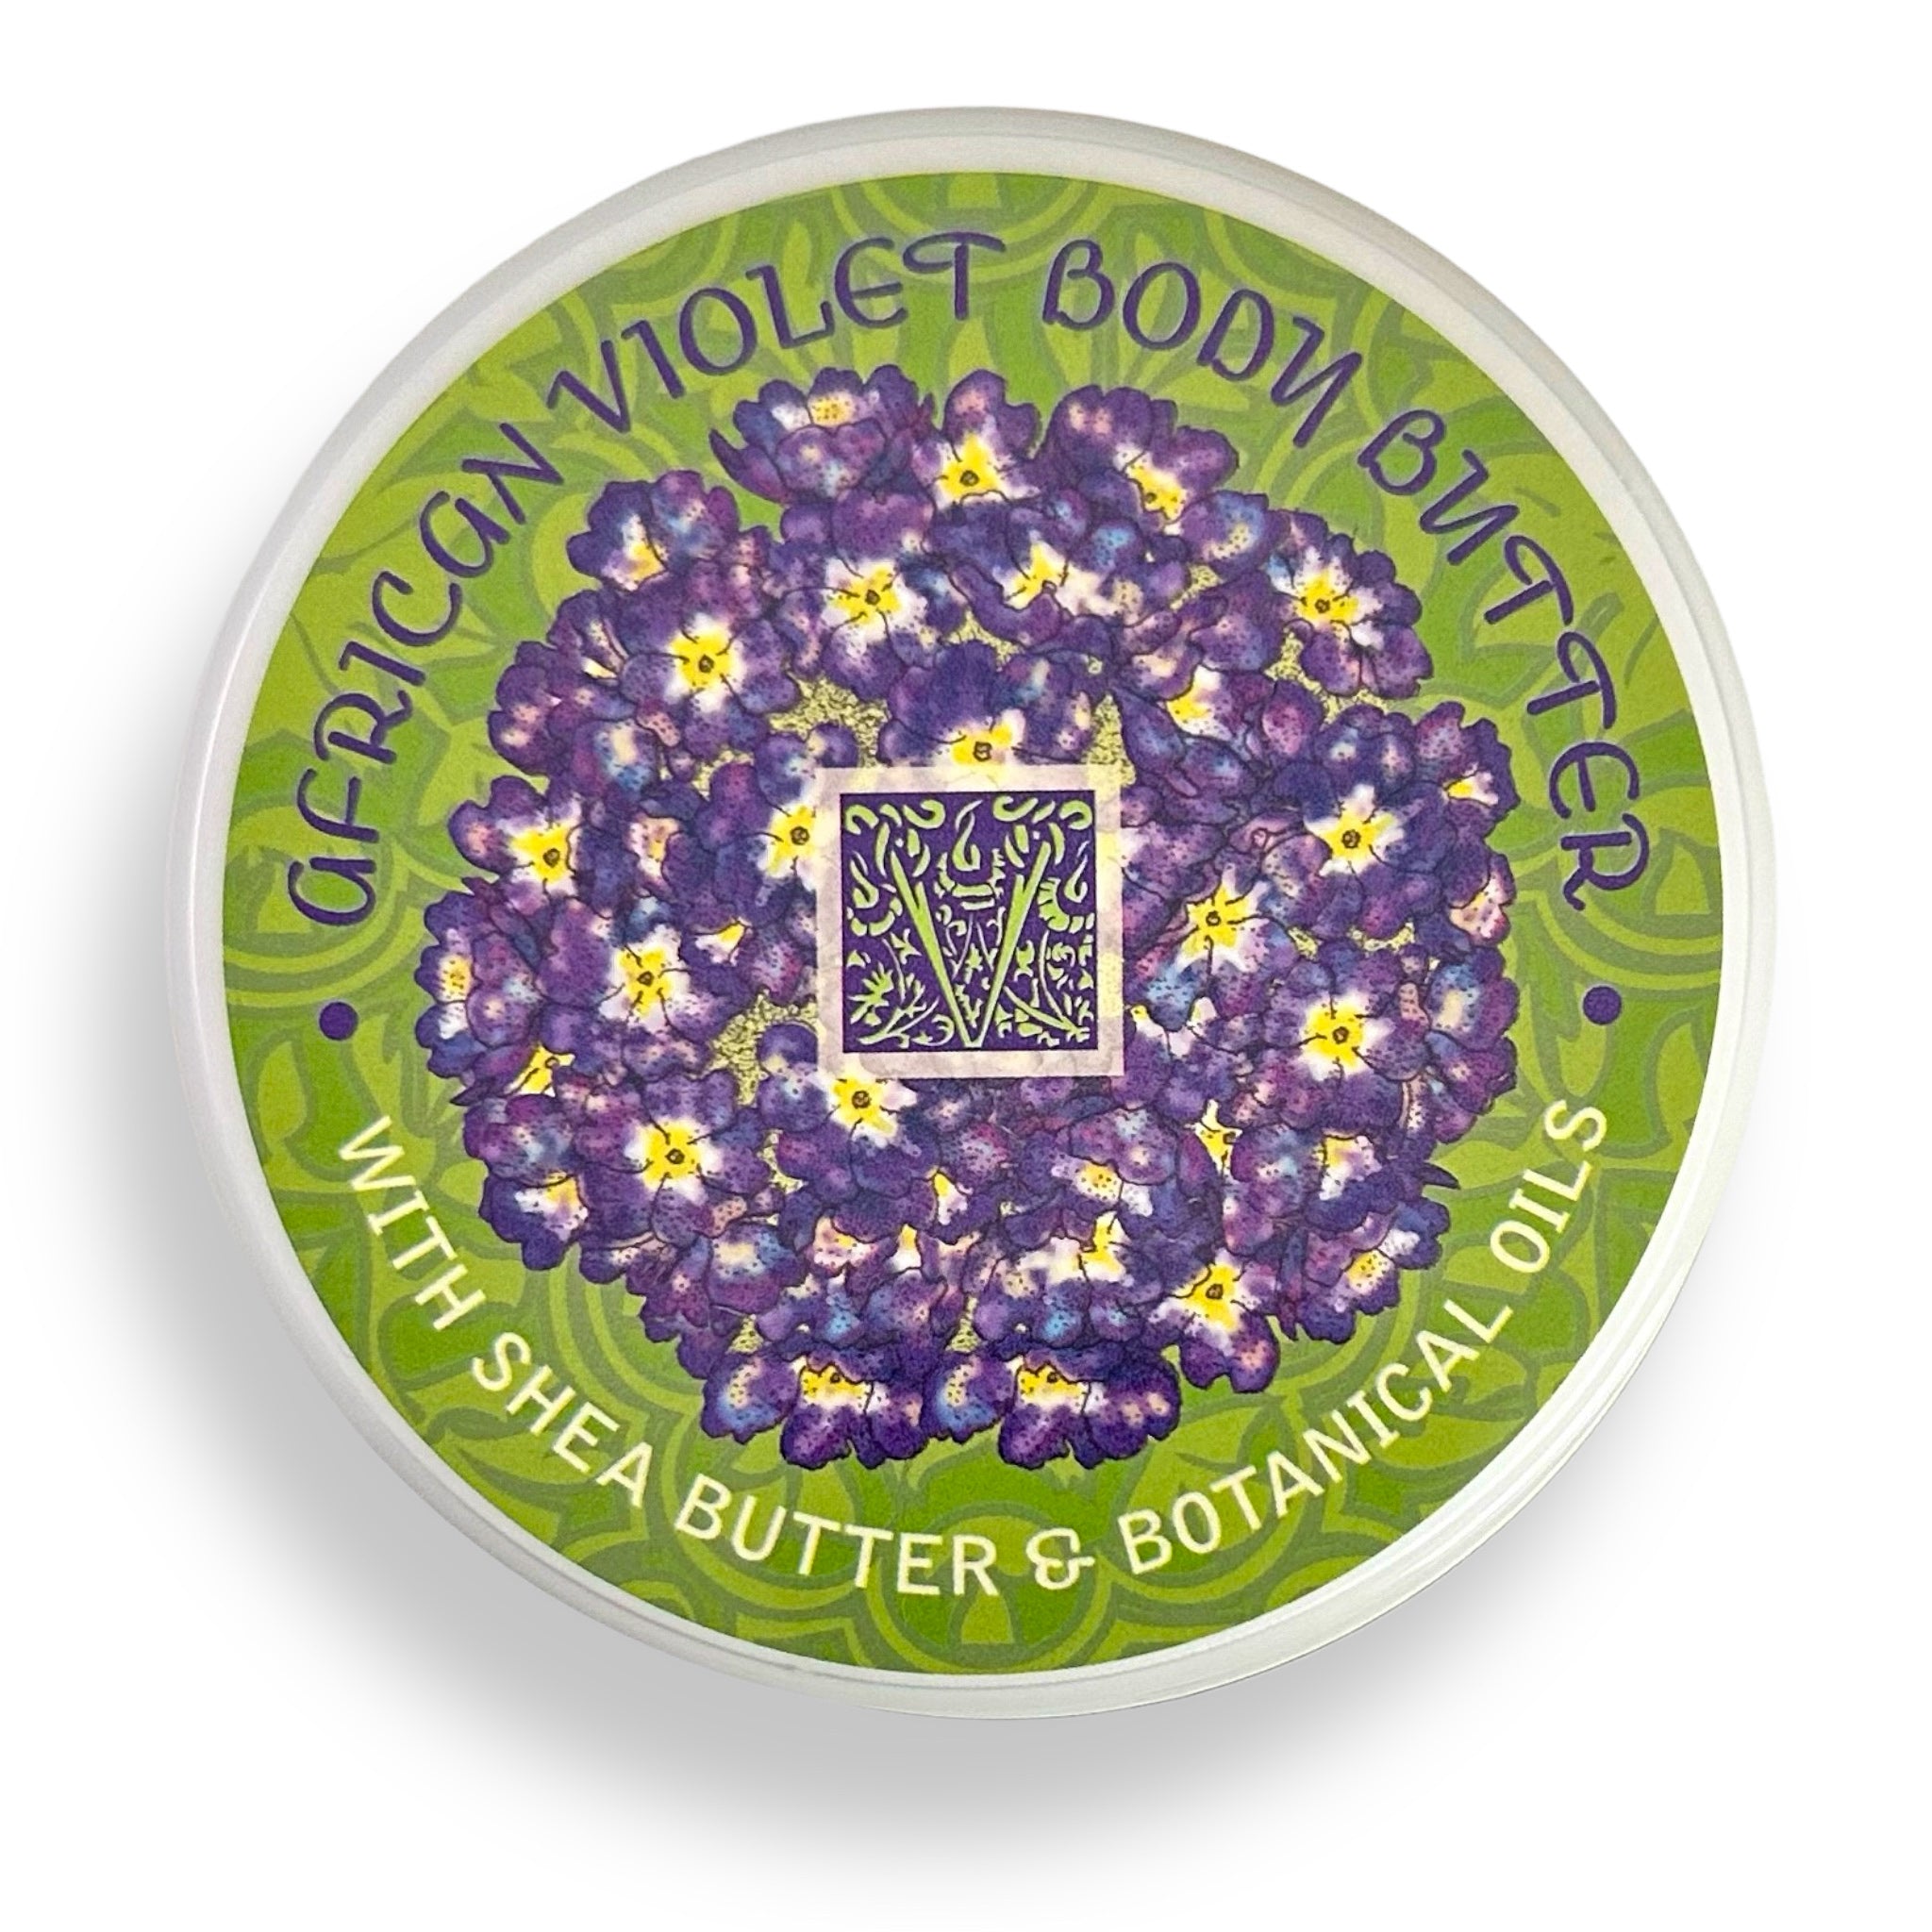 AFRICAN VIOLET Body Butter - Greenwich Bay Trading Company